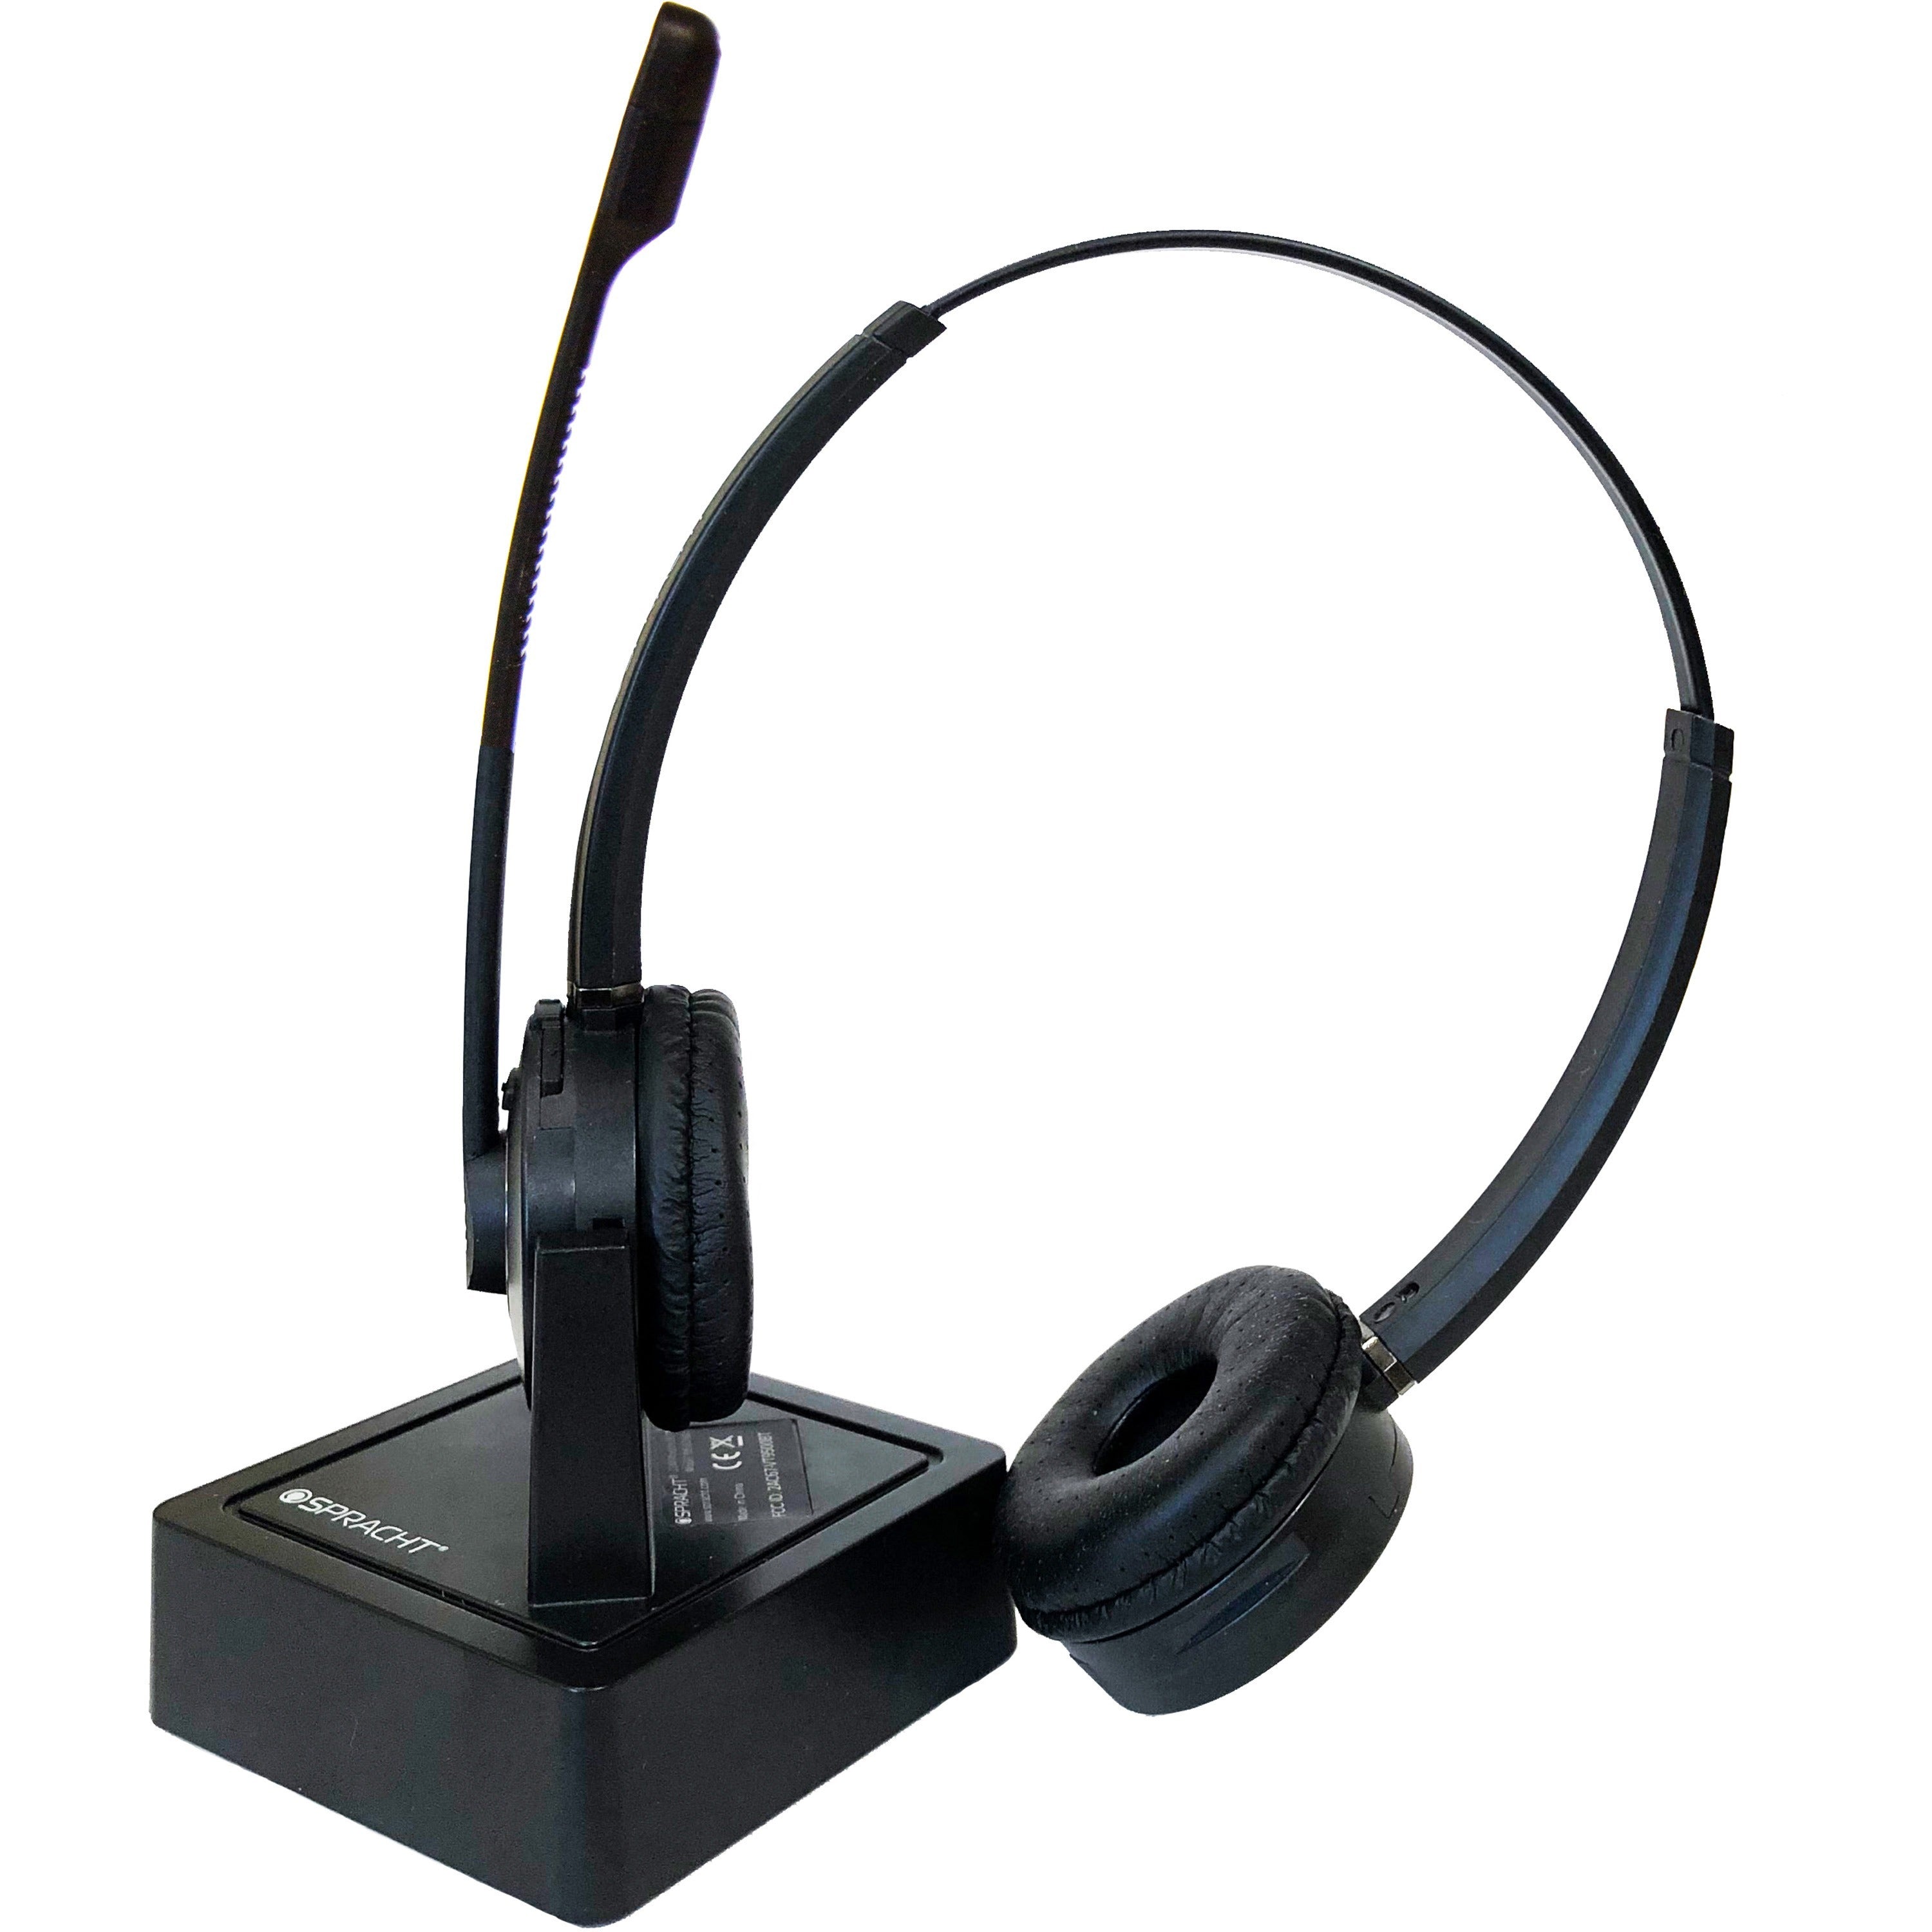 spracht-zum-maestro-bt-hs-2051-headset-stereo-wireless-bluetooth-328-ft-over-the-head-binaural-noise-cancelling-echo-cancelling-microphone_spths2051 - 3